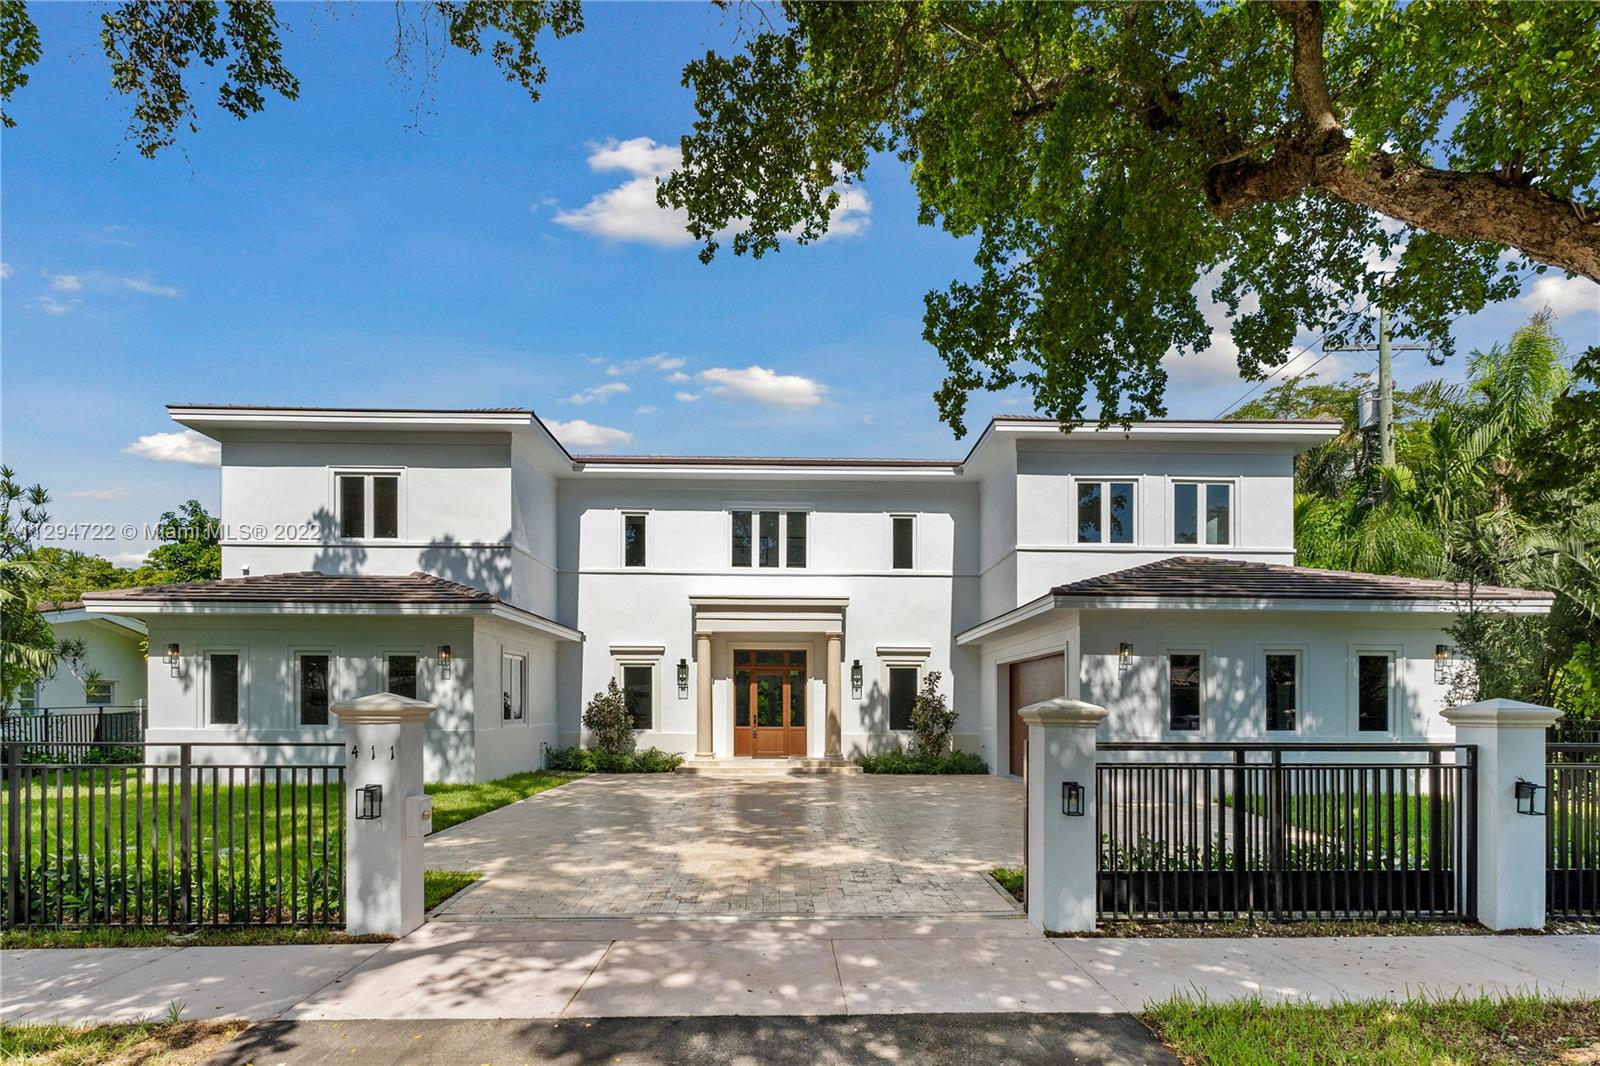 Unique opportunity to purchase a brand new construction home in the heart of Coral Gables. This beautiful 6 bed, 6 bath home designed by renowned English architect Callum Gibb has high ceilings, large format Spanish porcelain floors on the first floor and European oak wood floors in the bedrooms. The property comes with a stunning Italian kitchen with top-of-the-line SubZero, Wolf, and Bosch appliances including a gas cooktop. Bathrooms are equipped with German fixtures by Hansgrohe brand, Calaccatta countertops, and Italian vanities. The backyard has a saltwater gas-heated pool and a spacious covered terrace with a summer kitchen. This gated property comes with a 2-car garage with an electric vehicle charger spot and an extensive driveway paved with Italian travertine marble stone.